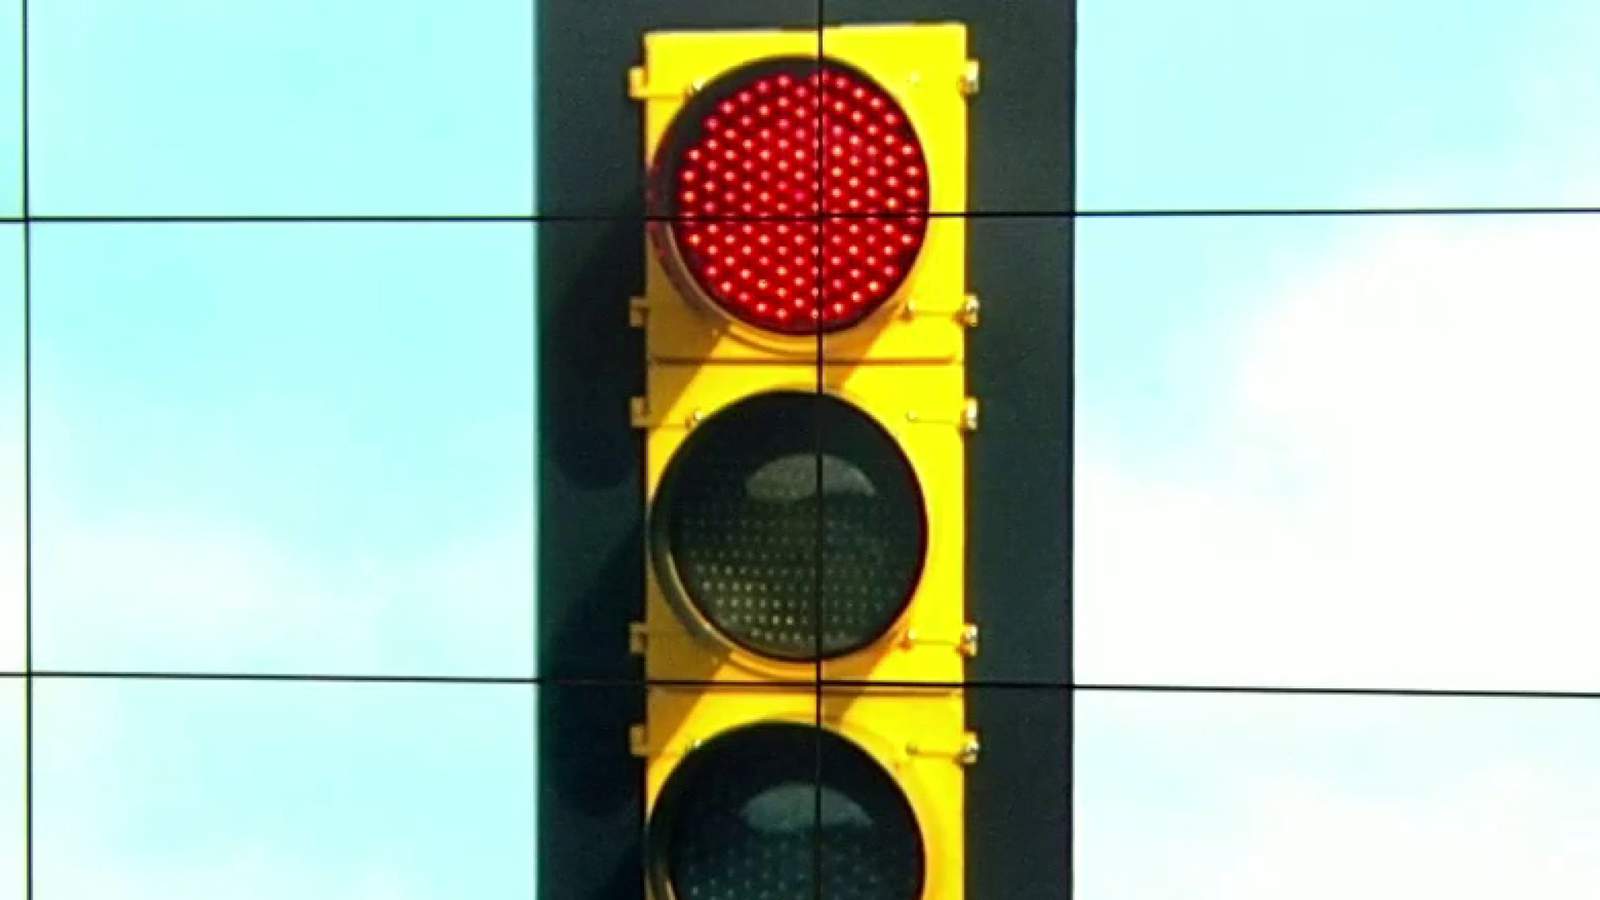 Ask 2: Can I turn right on a red signal if I am on the second lane from the right that allows right turns?